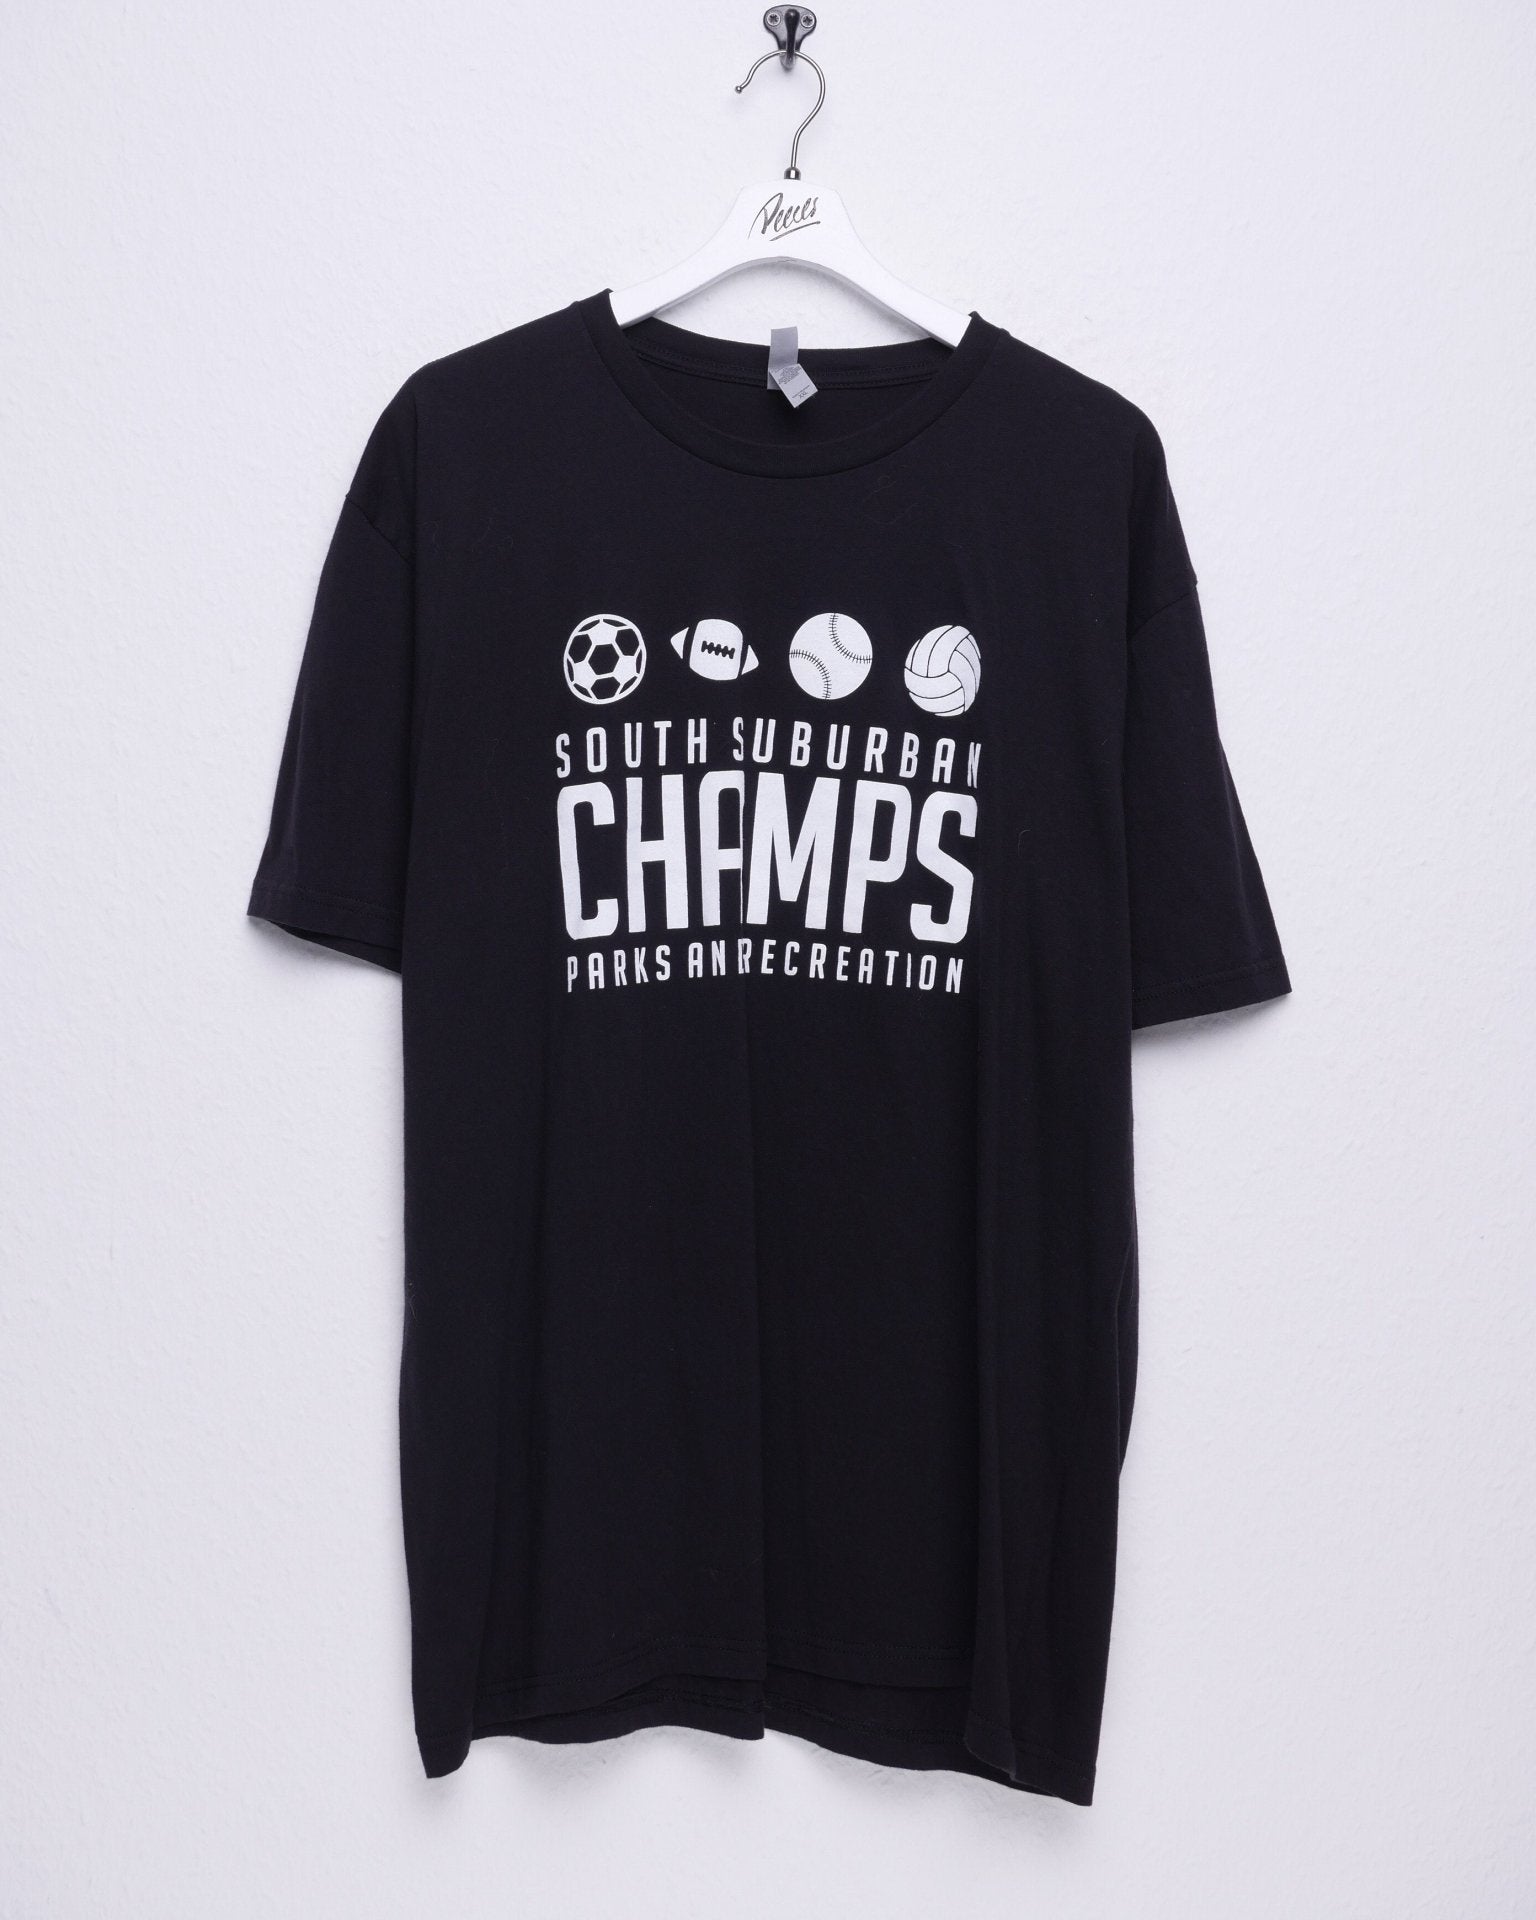 South Suburban Champs printed Spellout Vintage Shirt - Peeces